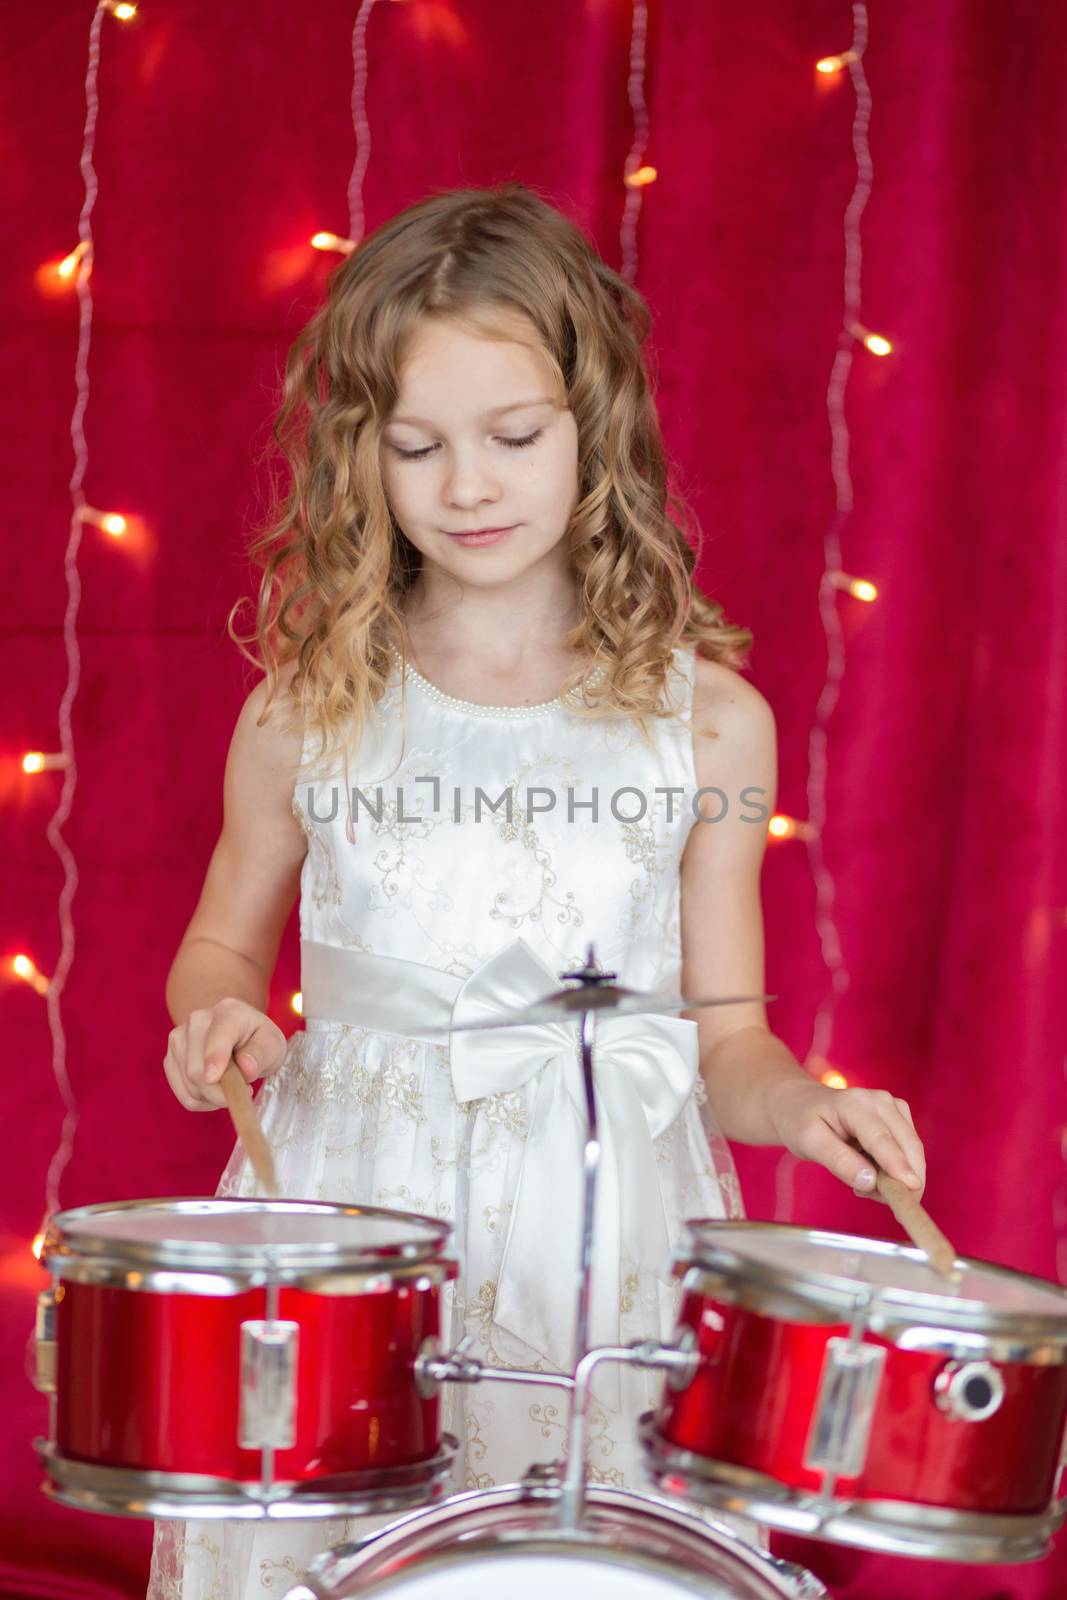 Little smiling girl plays on drums on red background with new year garlands.